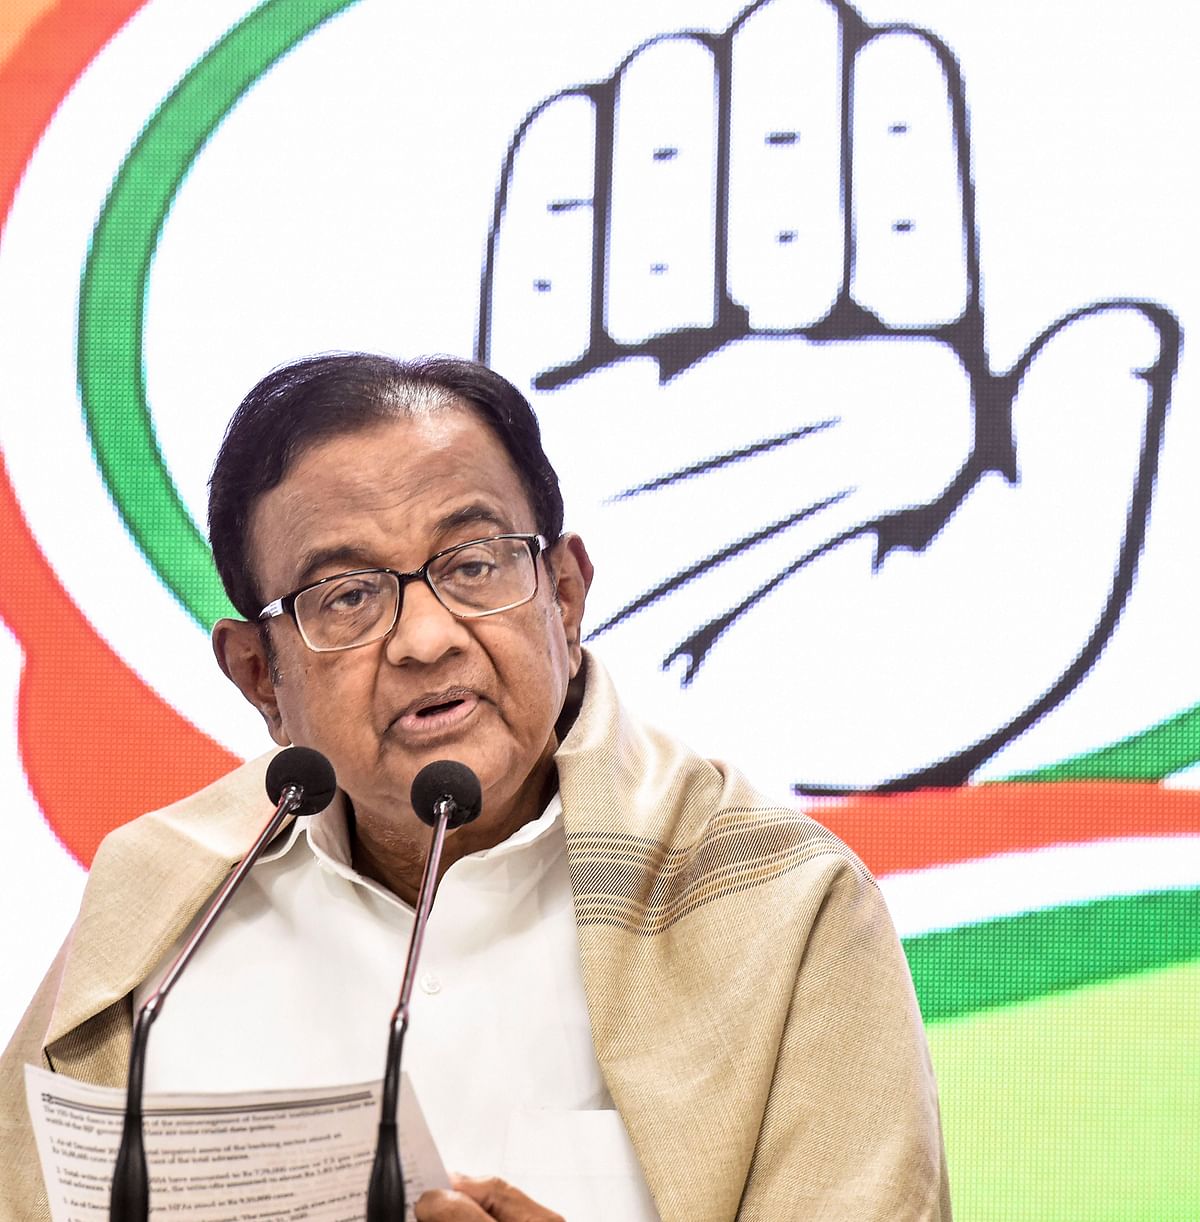 “I feel the Congress contested more seats than its organisational strength (in Bihar). The Congress was given 25 seats where the BJP or its allies had been winning for 20 years. The Congress should have refused to contest from these seats. The party should have fielded only 45 candidates.”  - Chidambaram